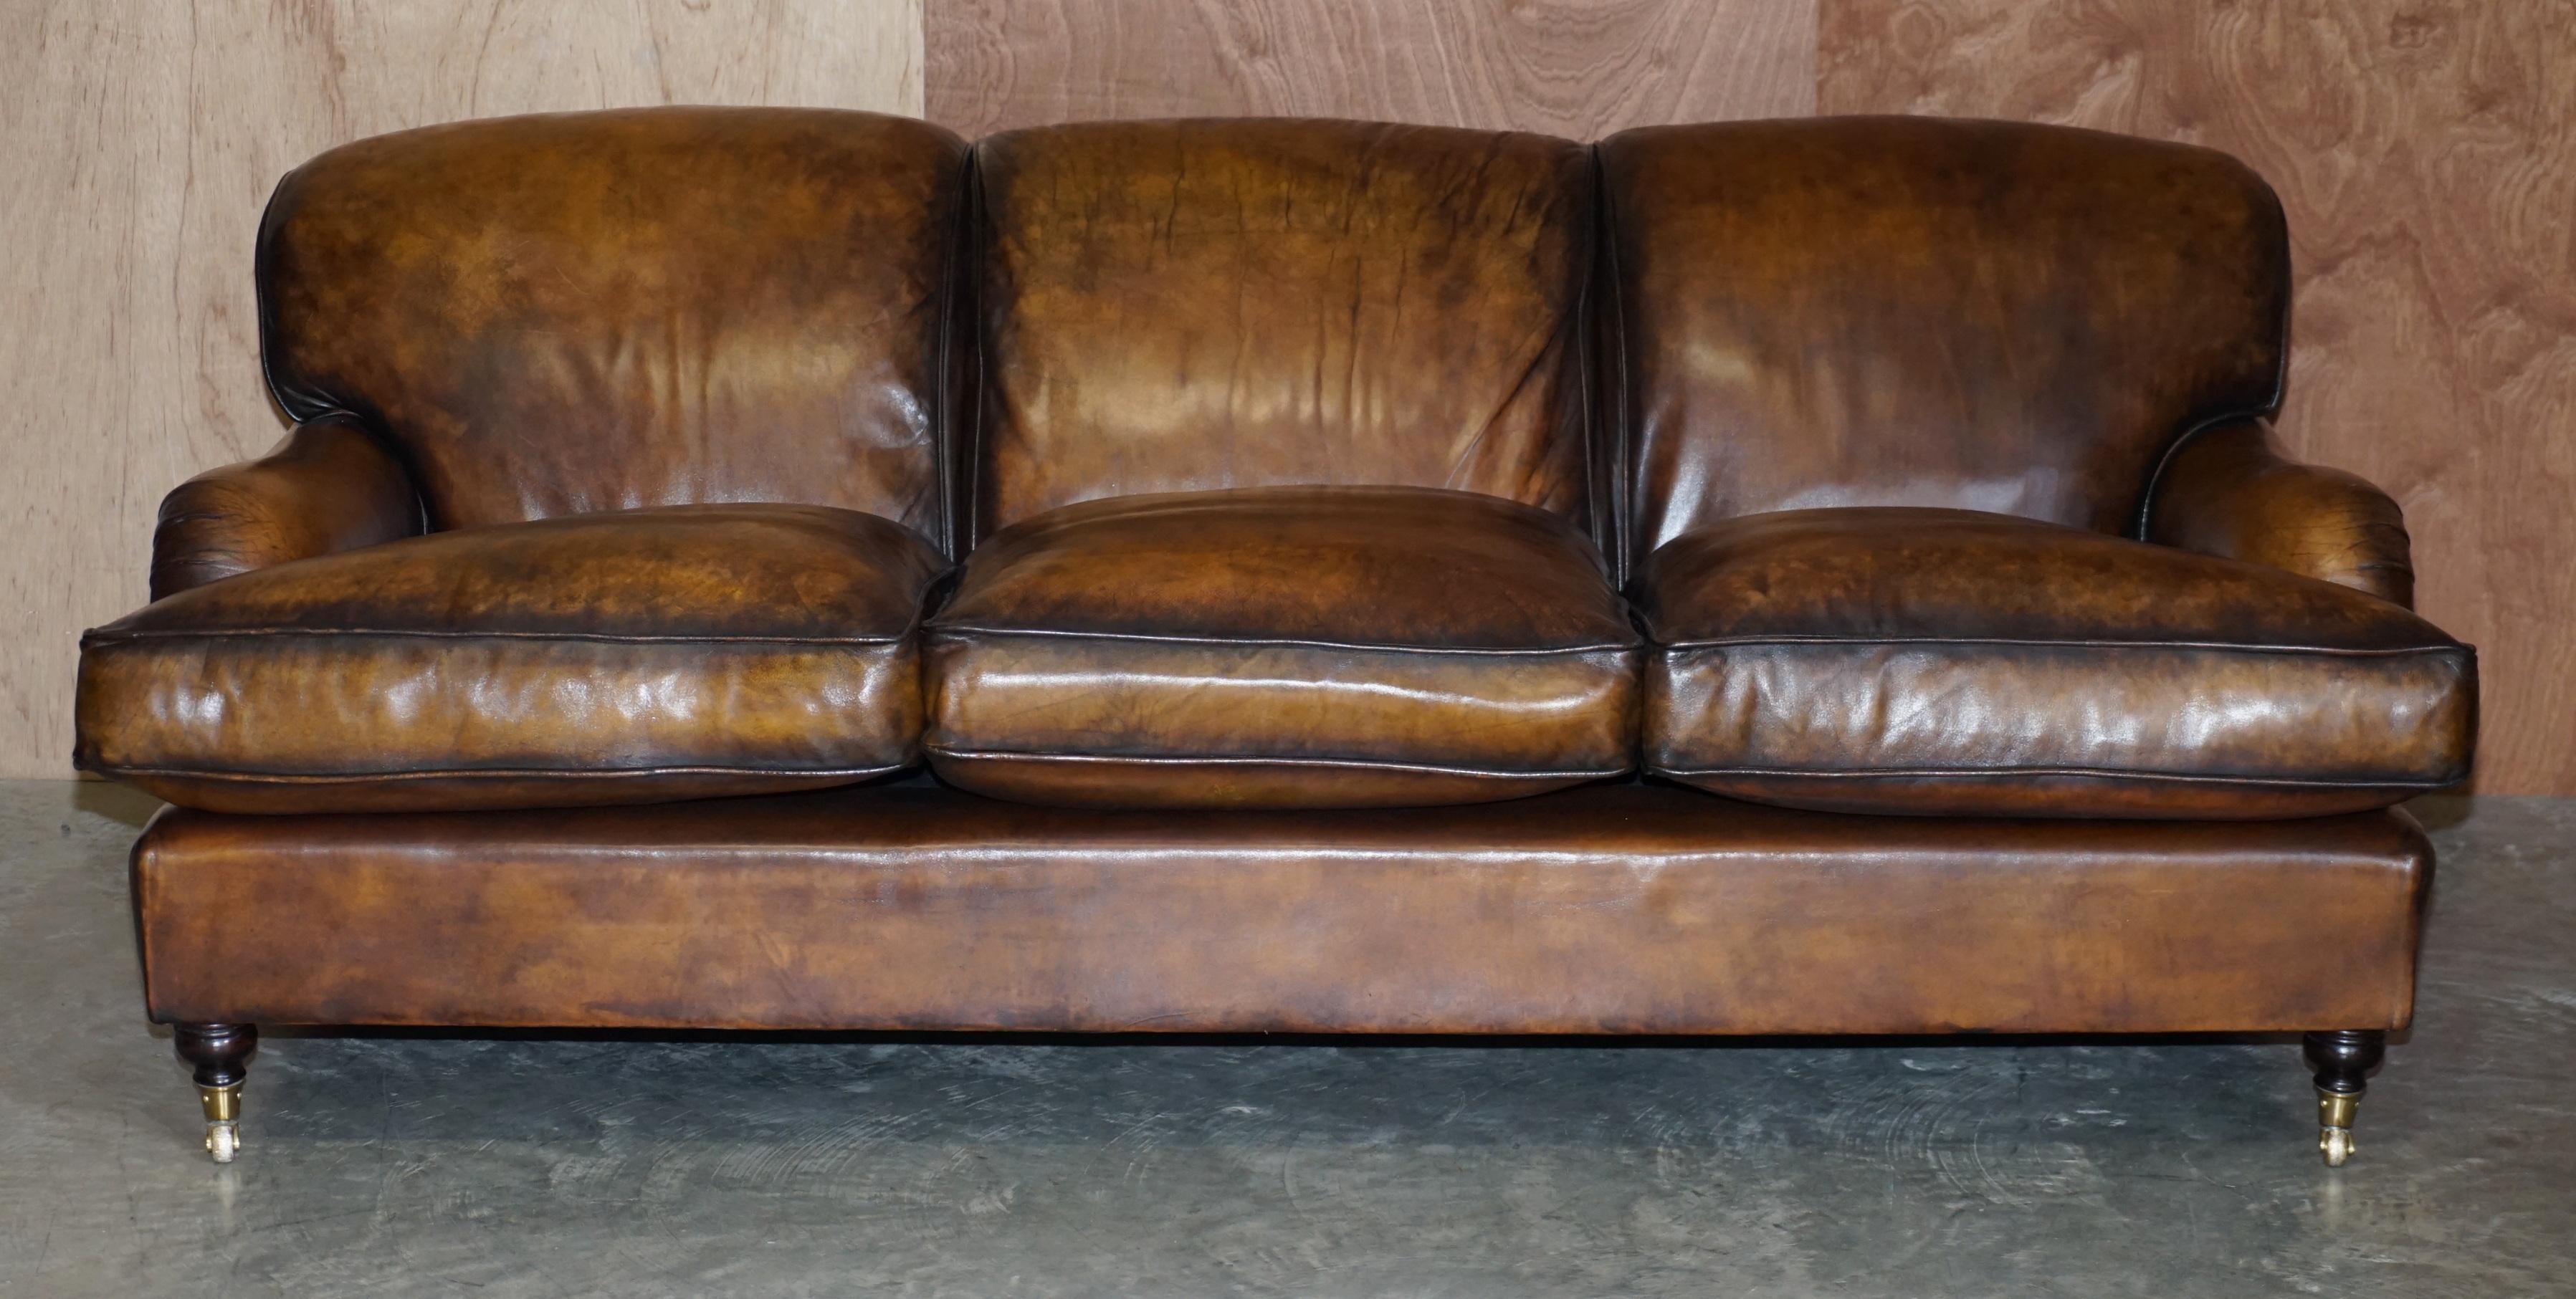 We are delighted to offer for sale this lovely vintage fully restored hand dyed brown leather Howard & Son’s style three seat sofa with overstuffed feather filled cushions

I have a matching two seat sofa which is with the restorers now and should